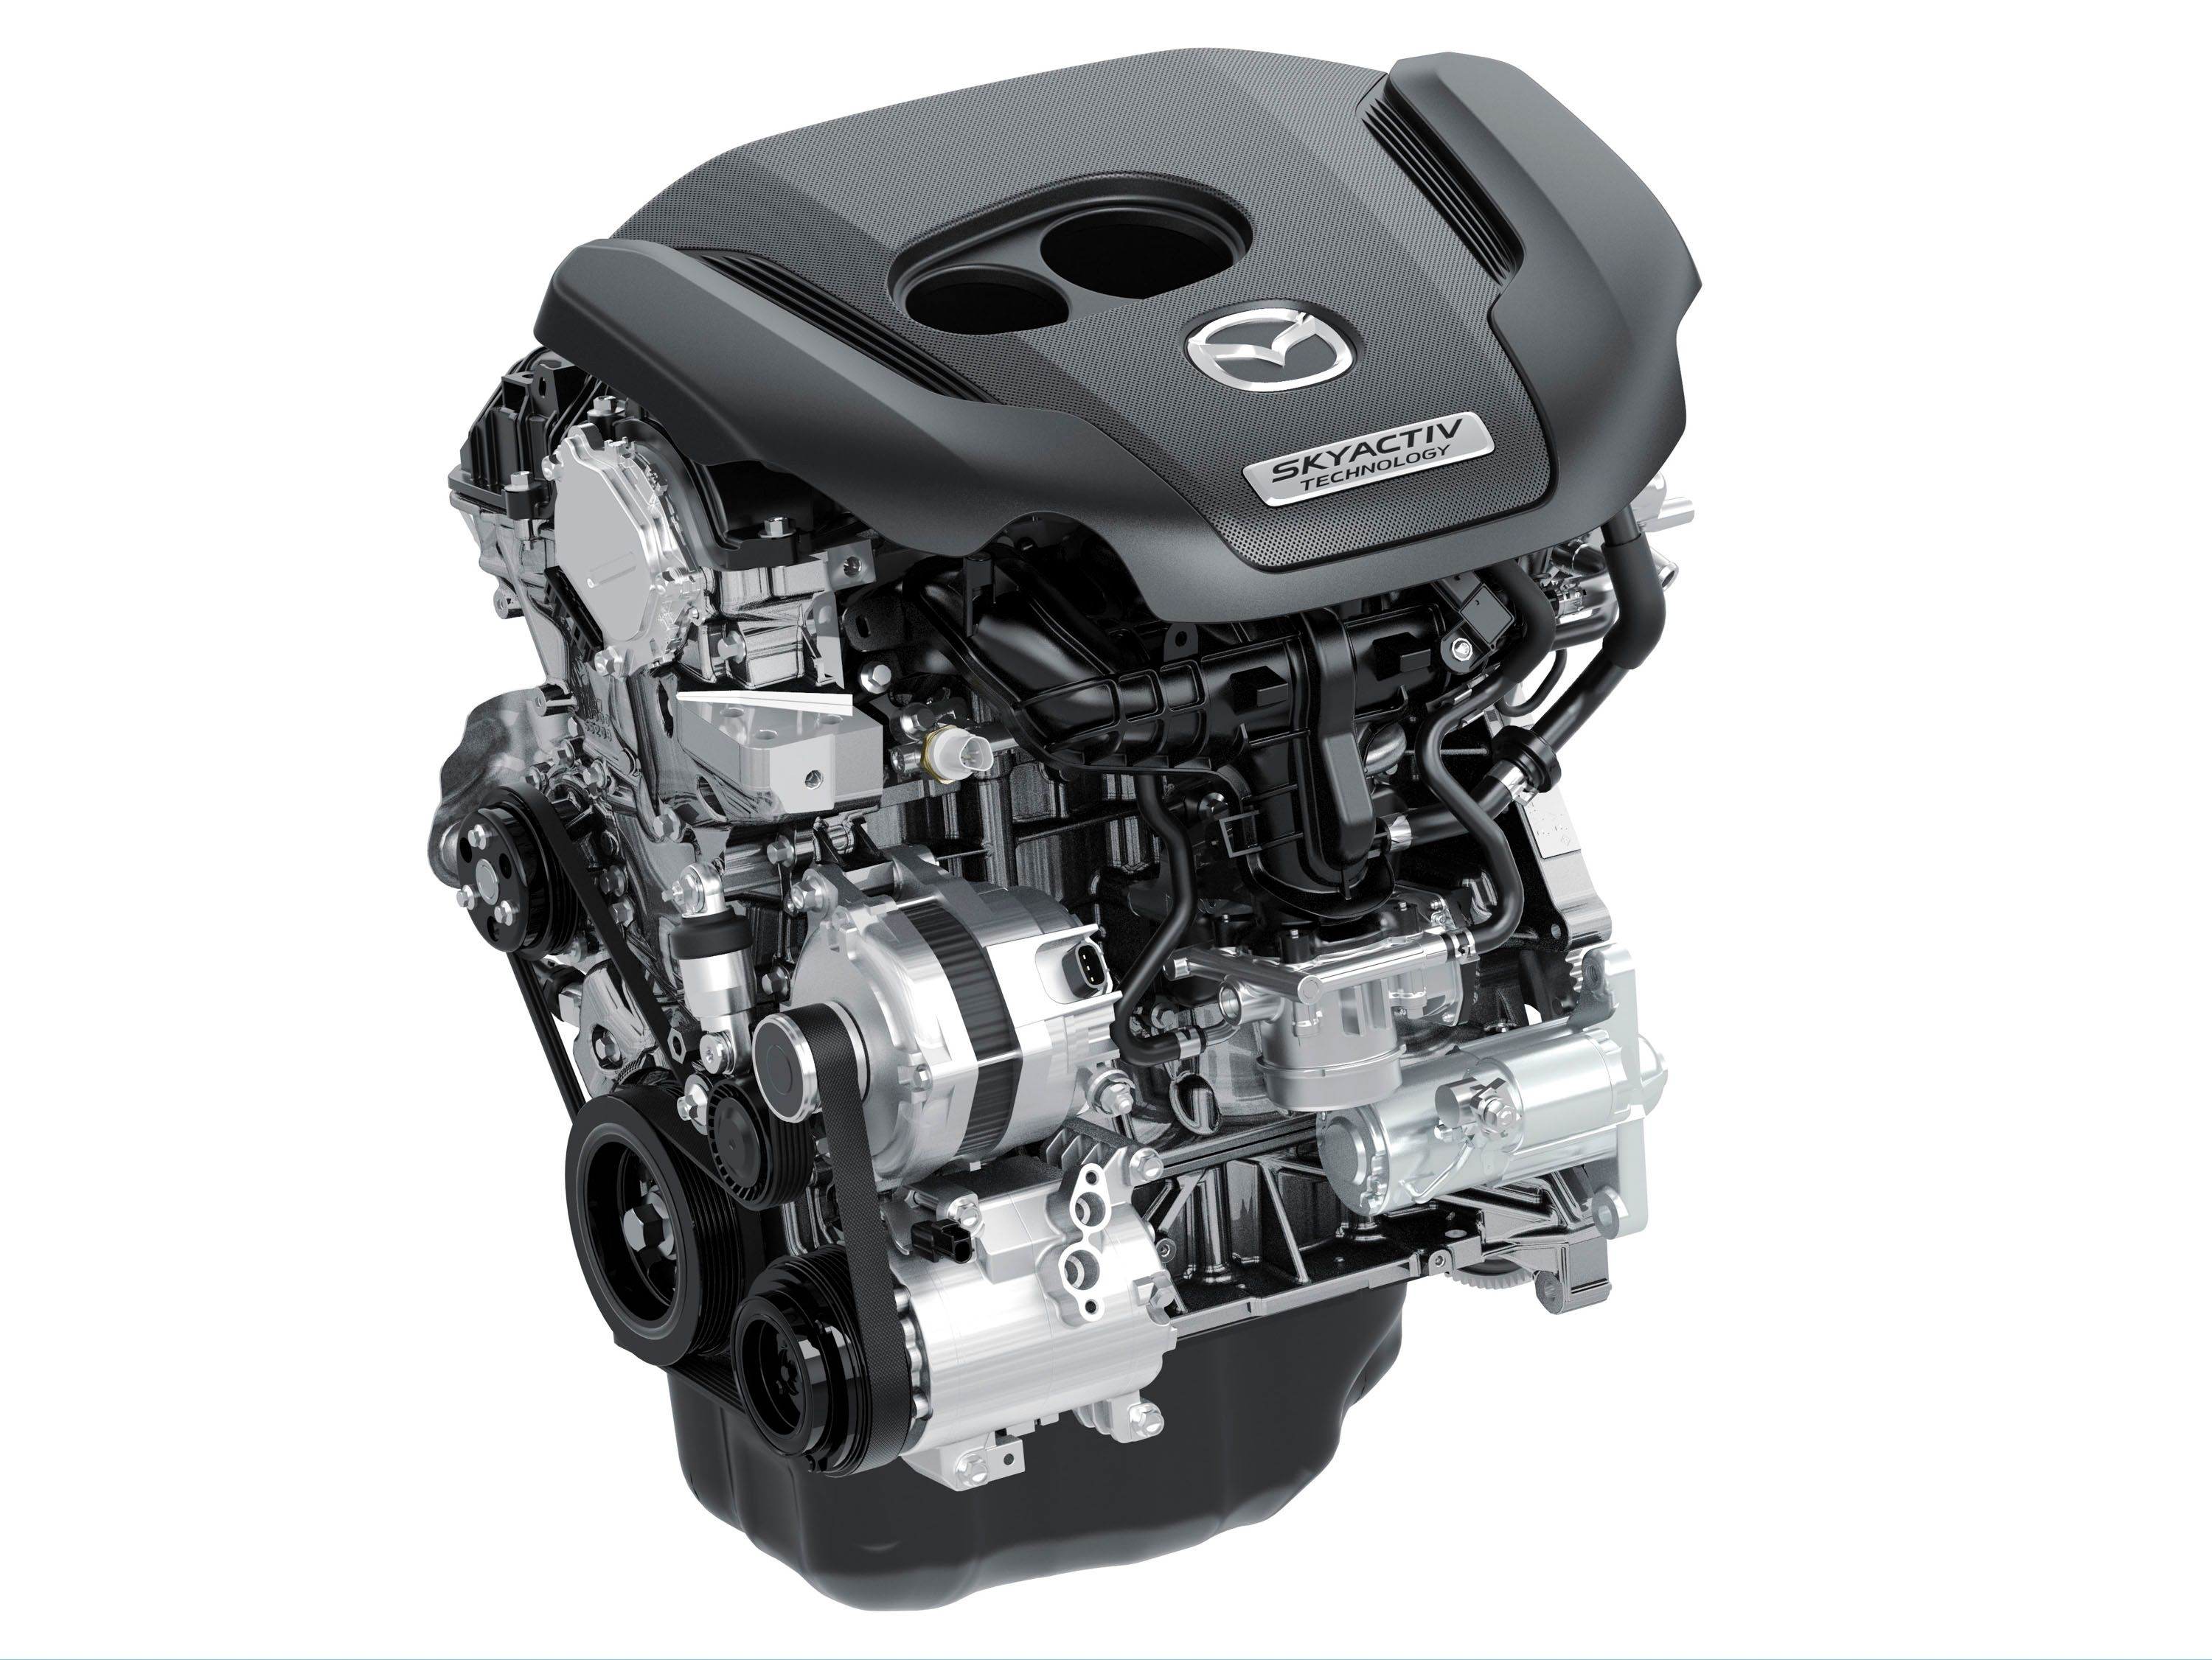 New turbo 2.5-liter engine plucked from the CX-9